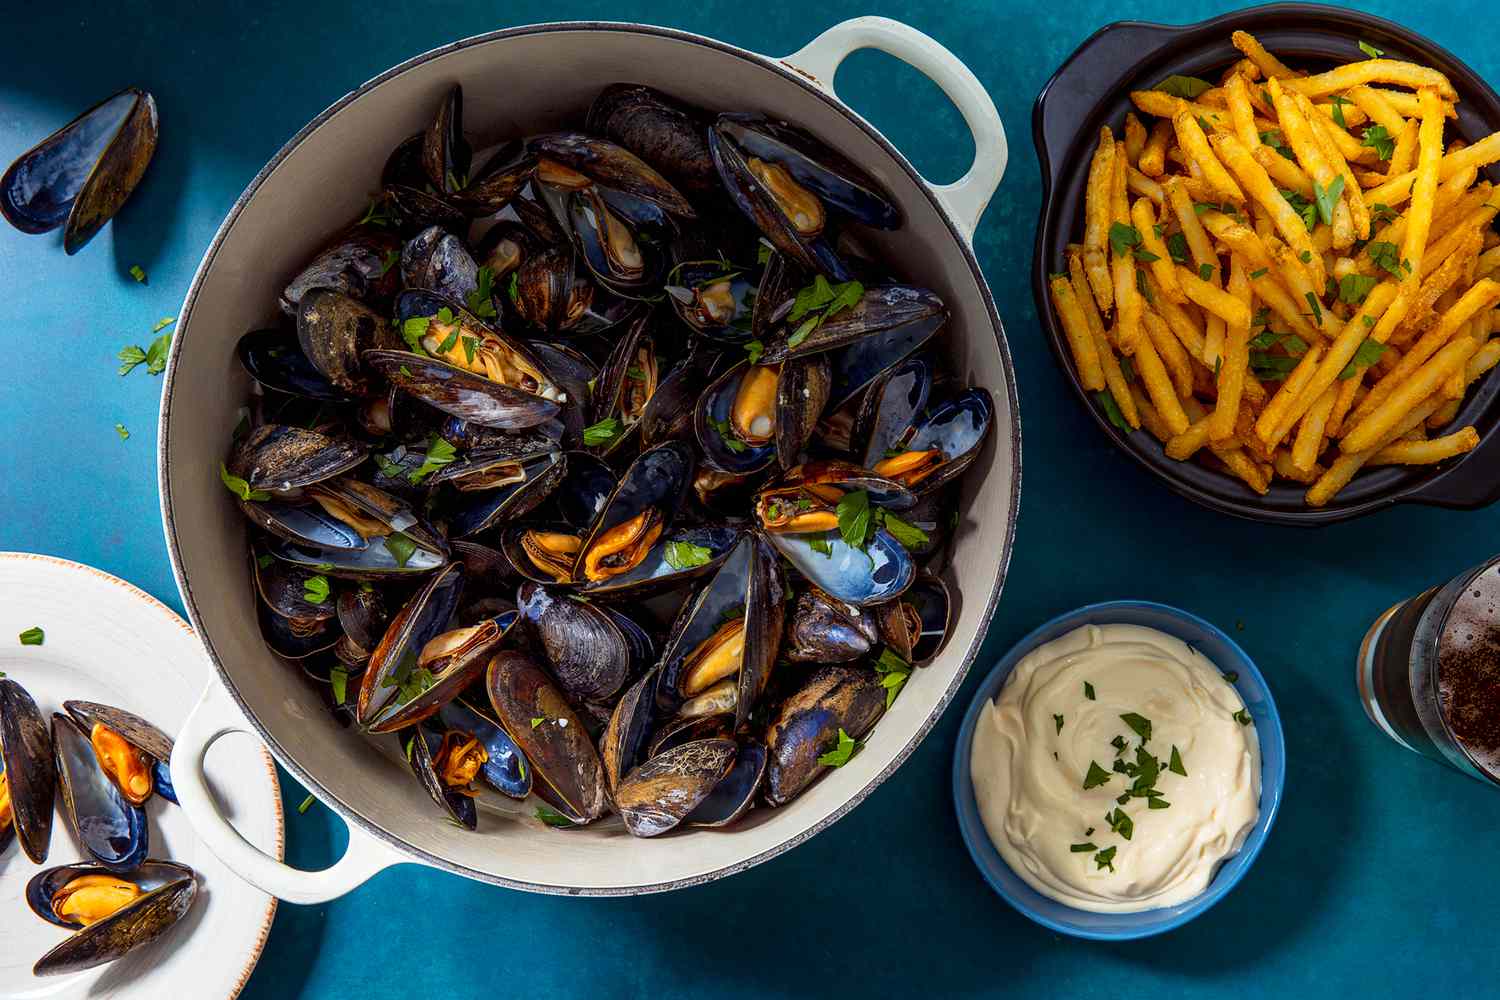 30 interesting facts about moules-frites